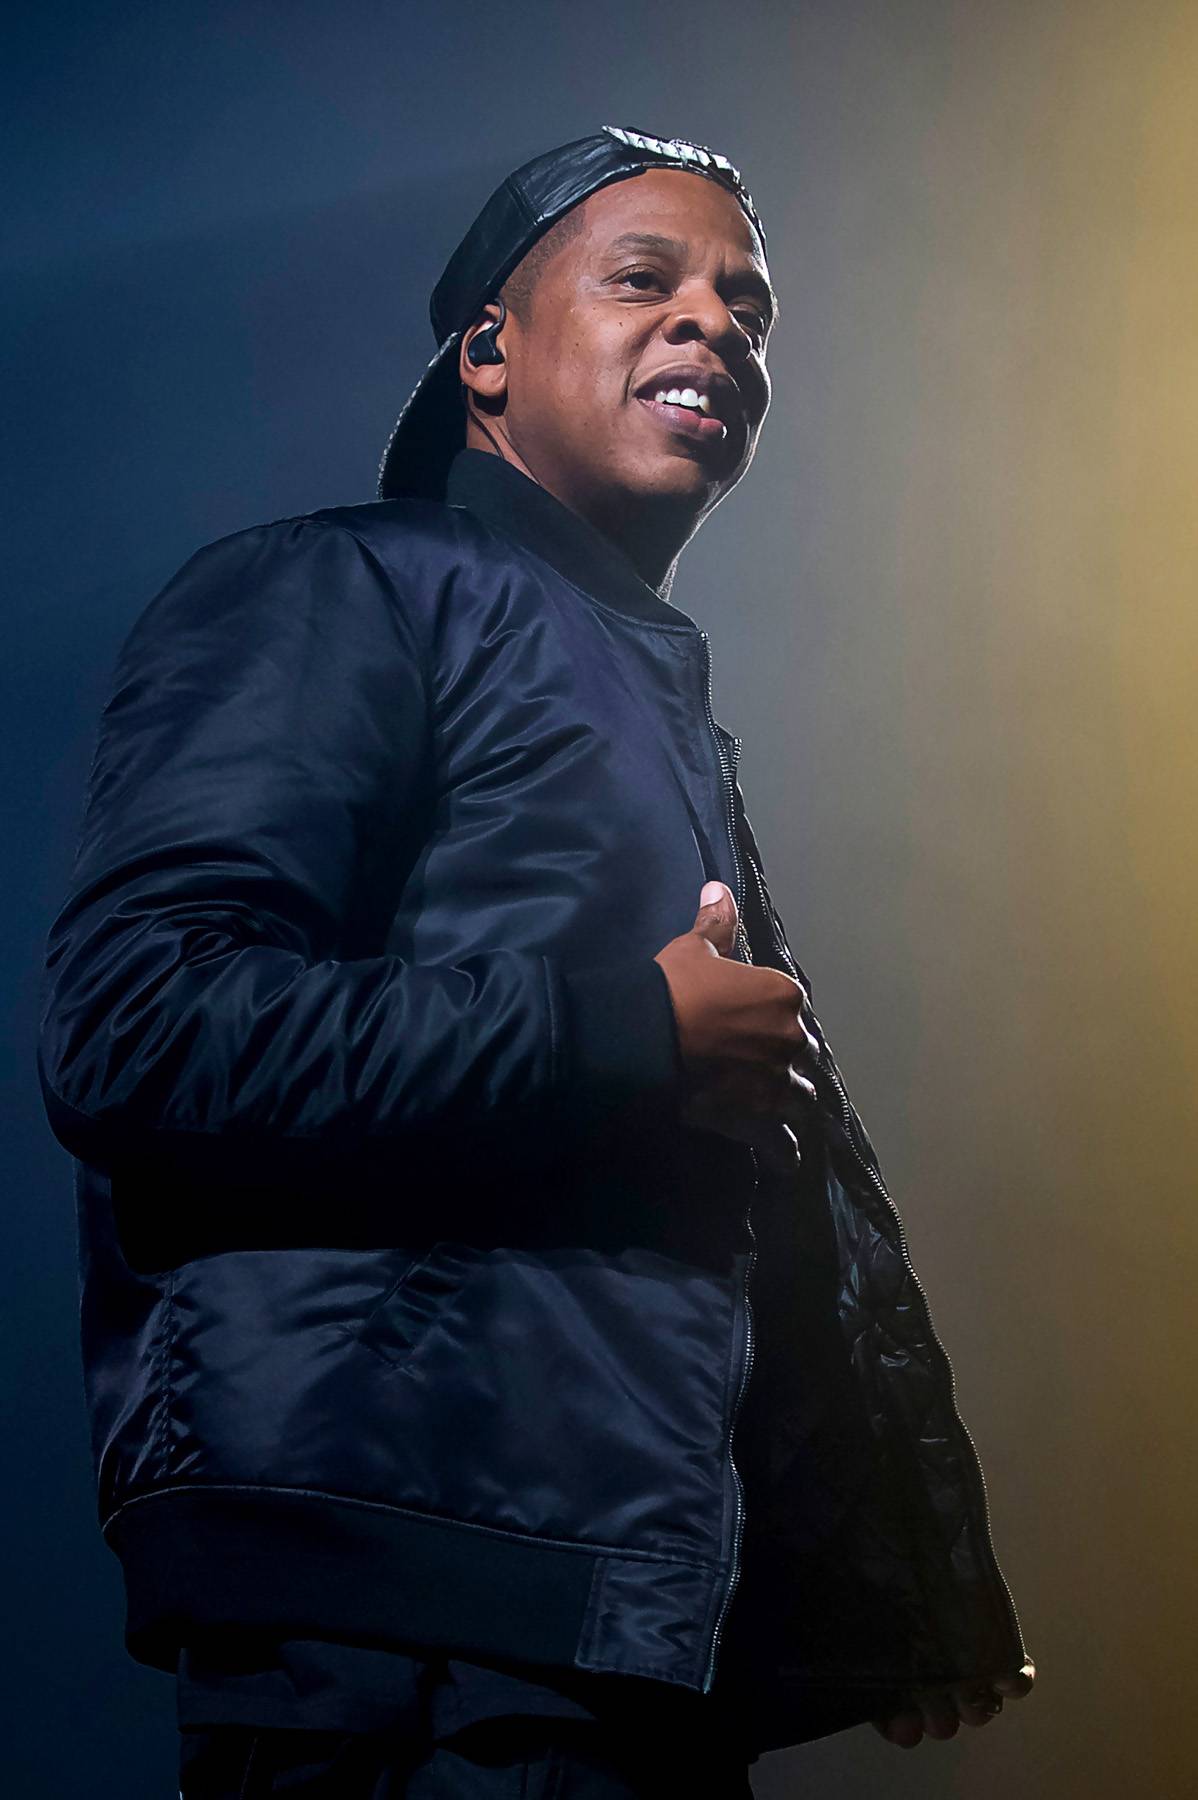 On his 46th birthday, here are some photos of Jay Z at Yankees